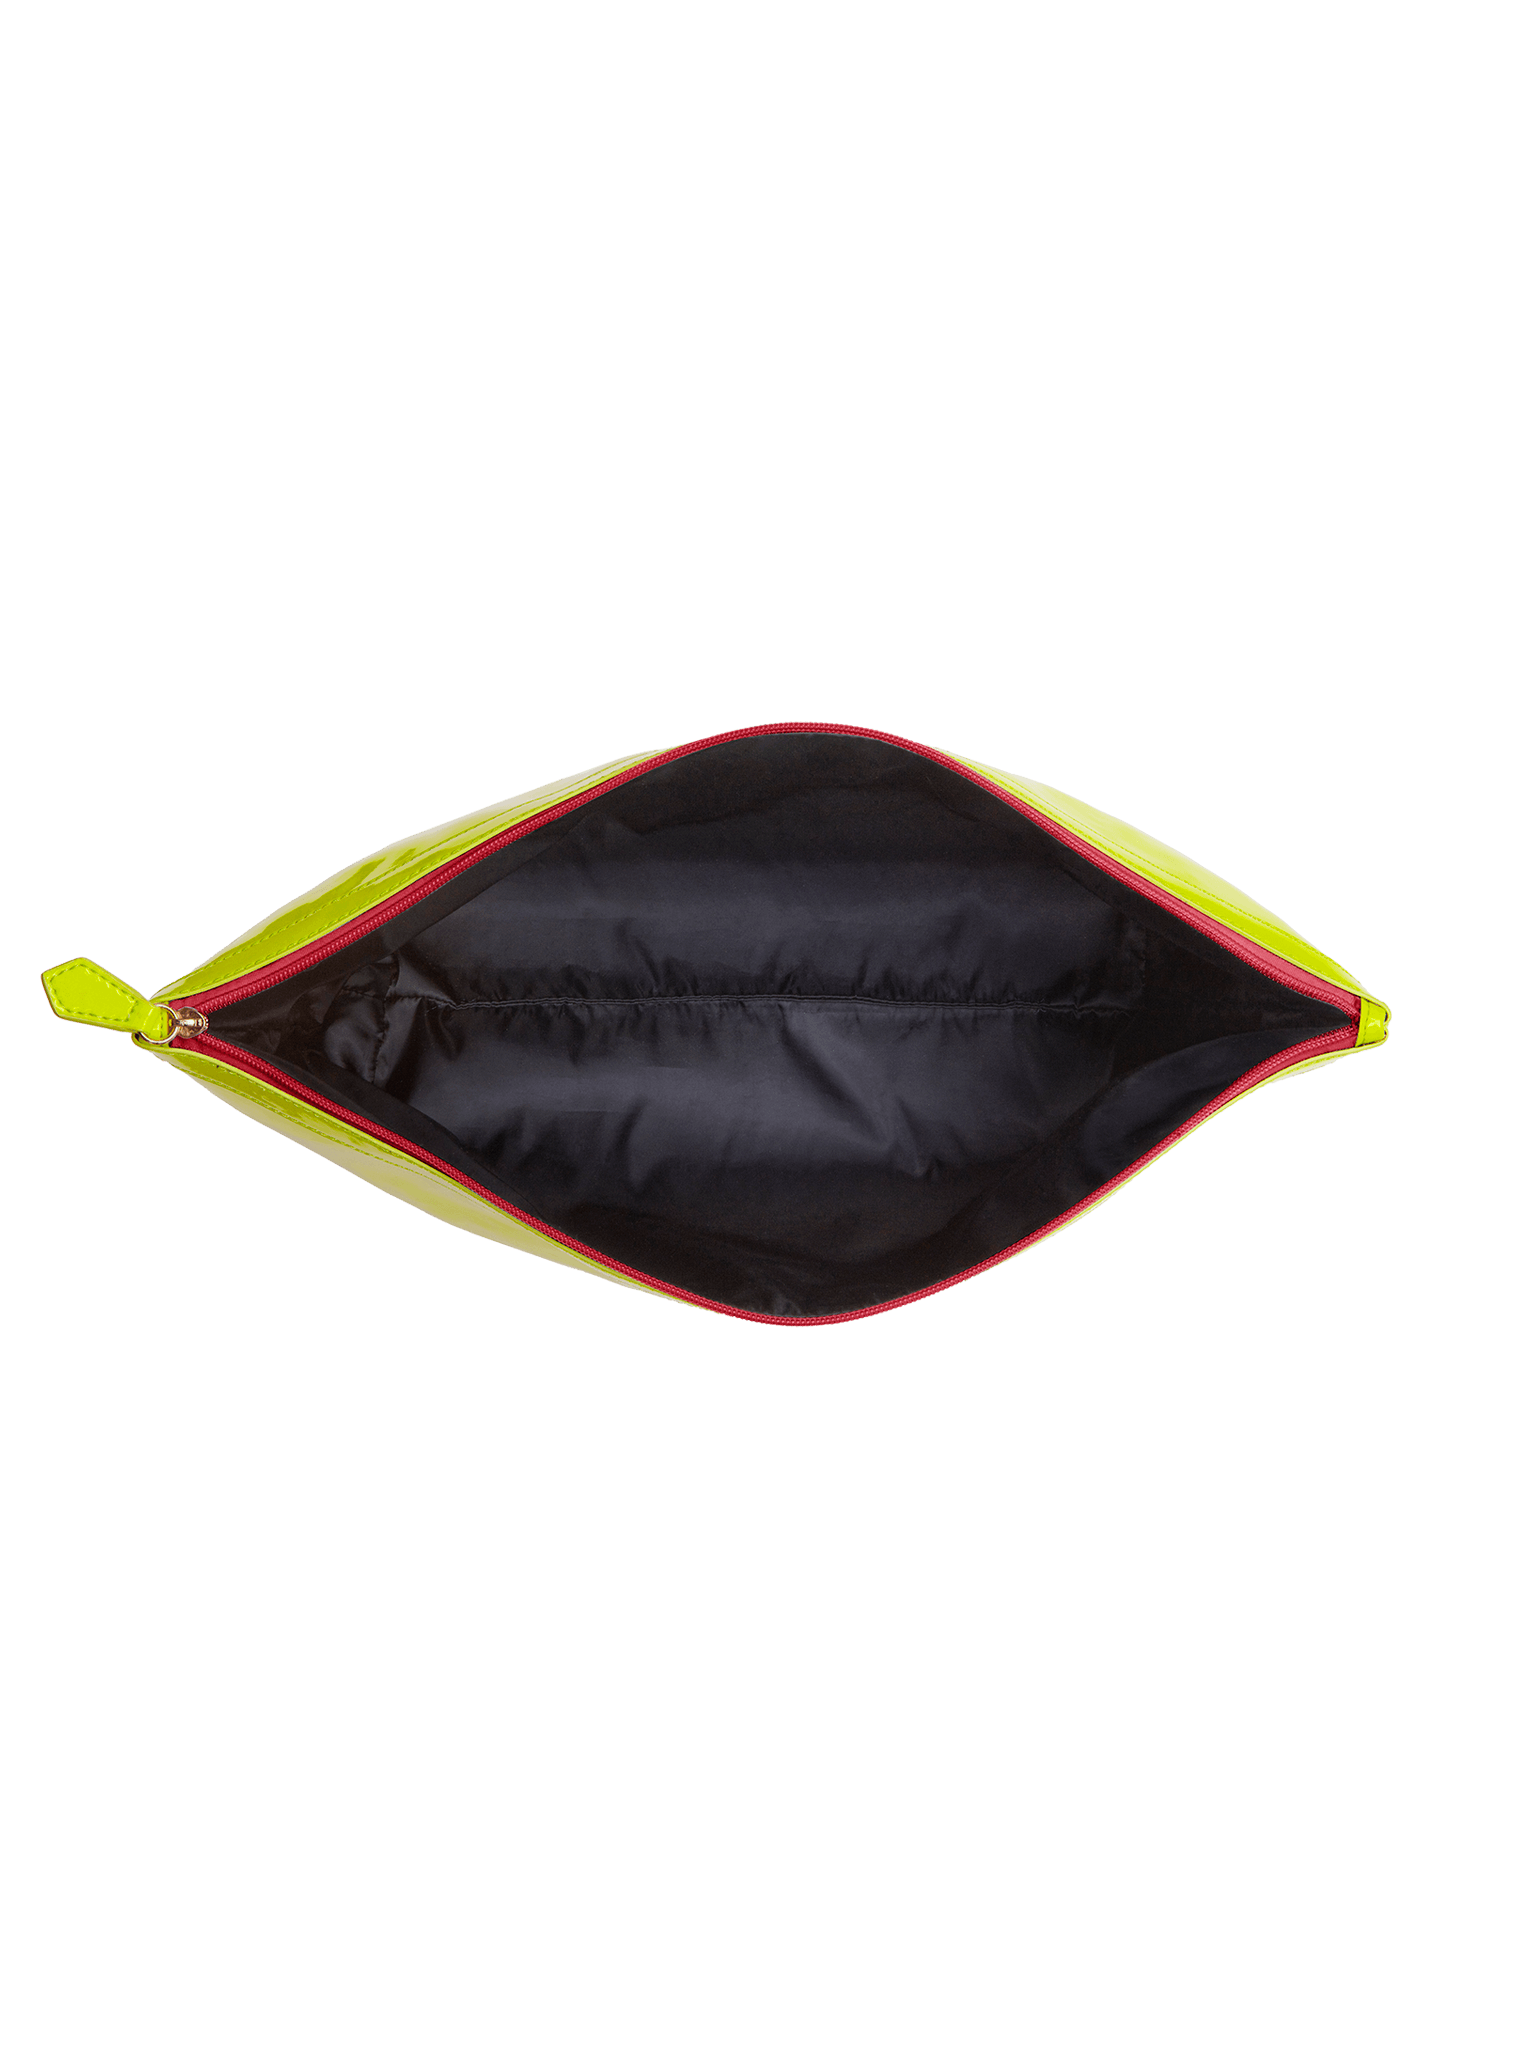 Designed with water resistant material, keep your items protected from the sun, sea and sand inside the large vegan leather pouch.  